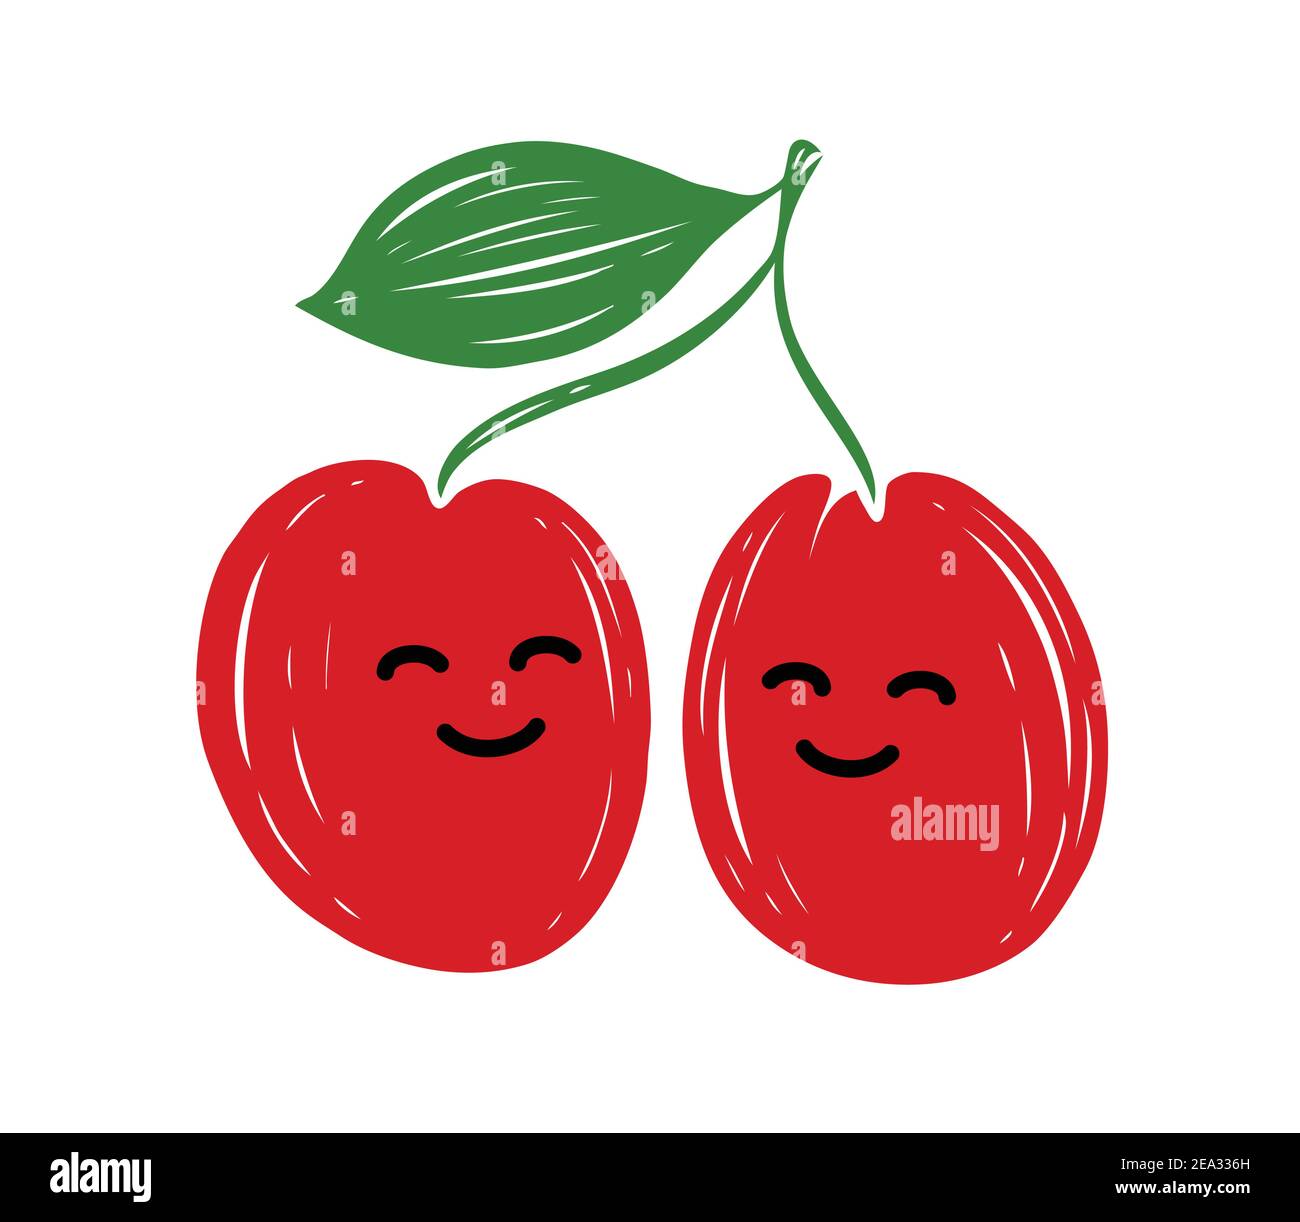 Couple in love cherries with faces. Funny vector illustration Stock Vector